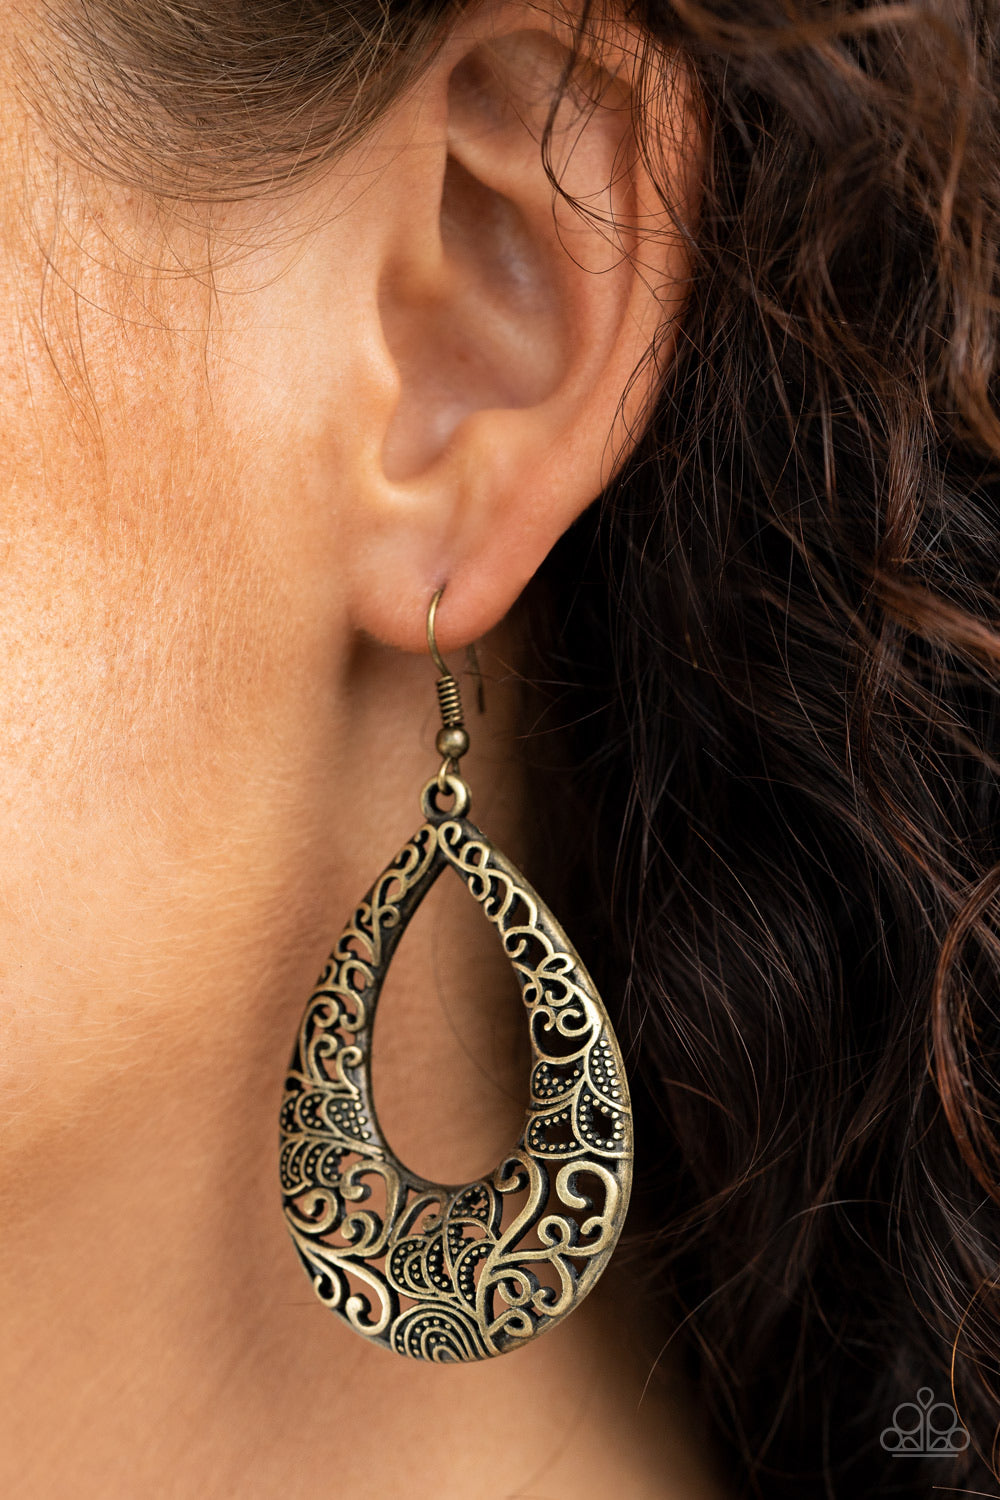 Get Into The GROVE Earrings  - Brass